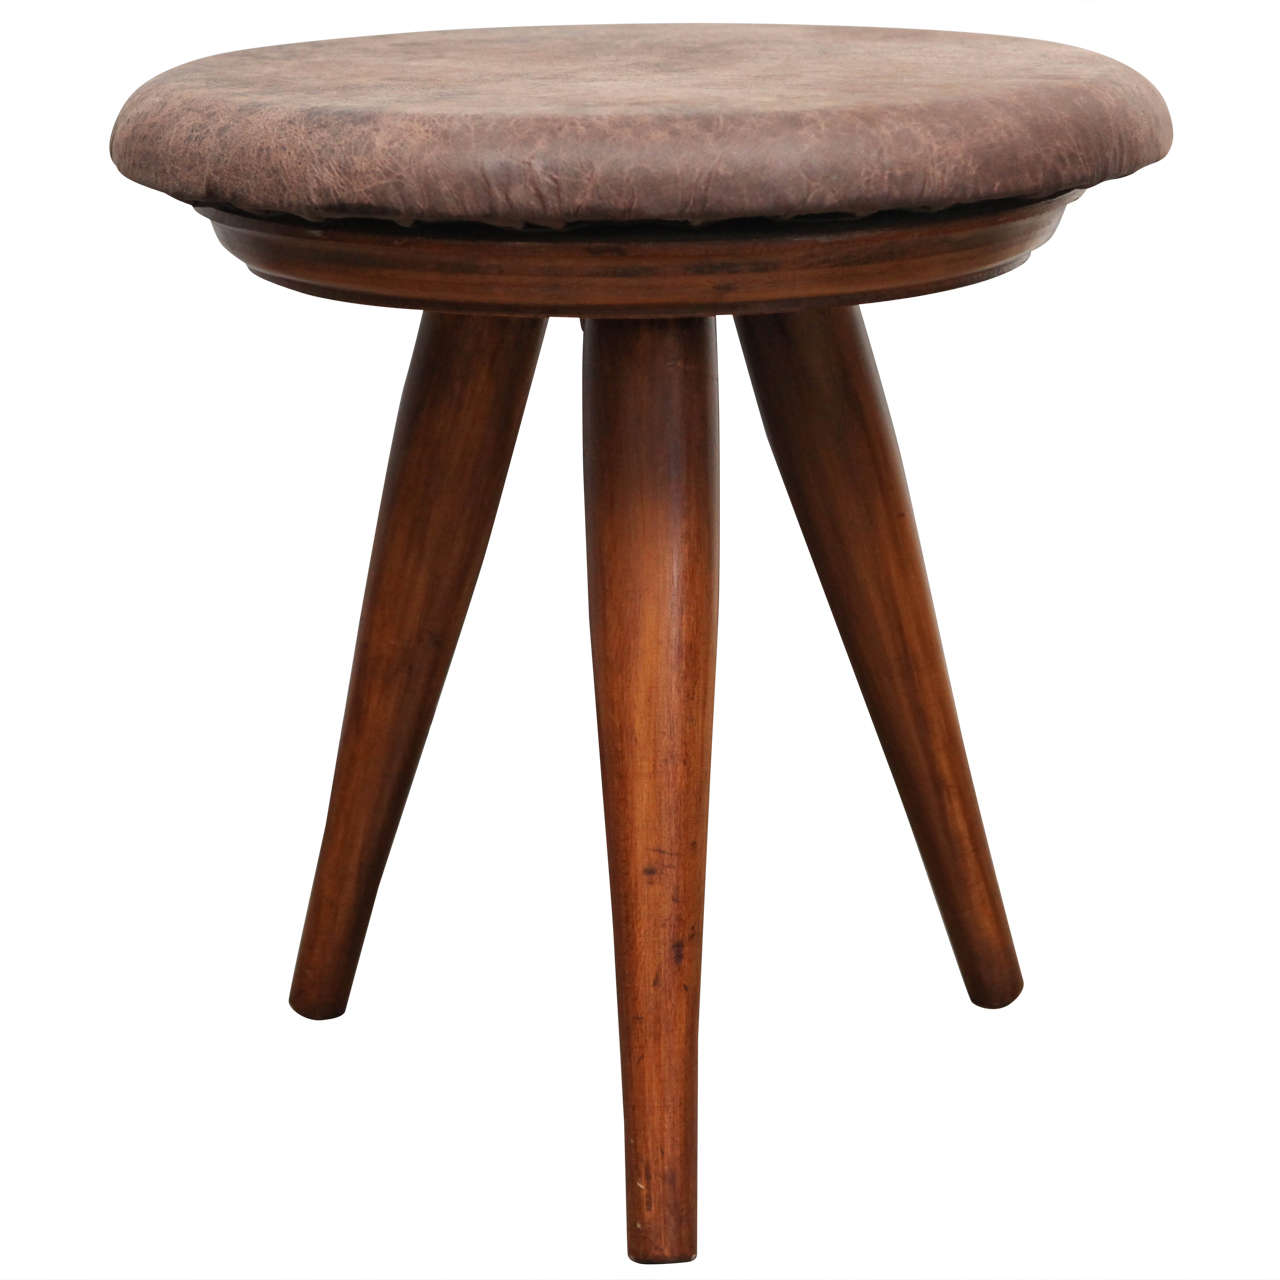 Mid-Century Modern Tripod Swivel Stool with Brown Leather Upholstery